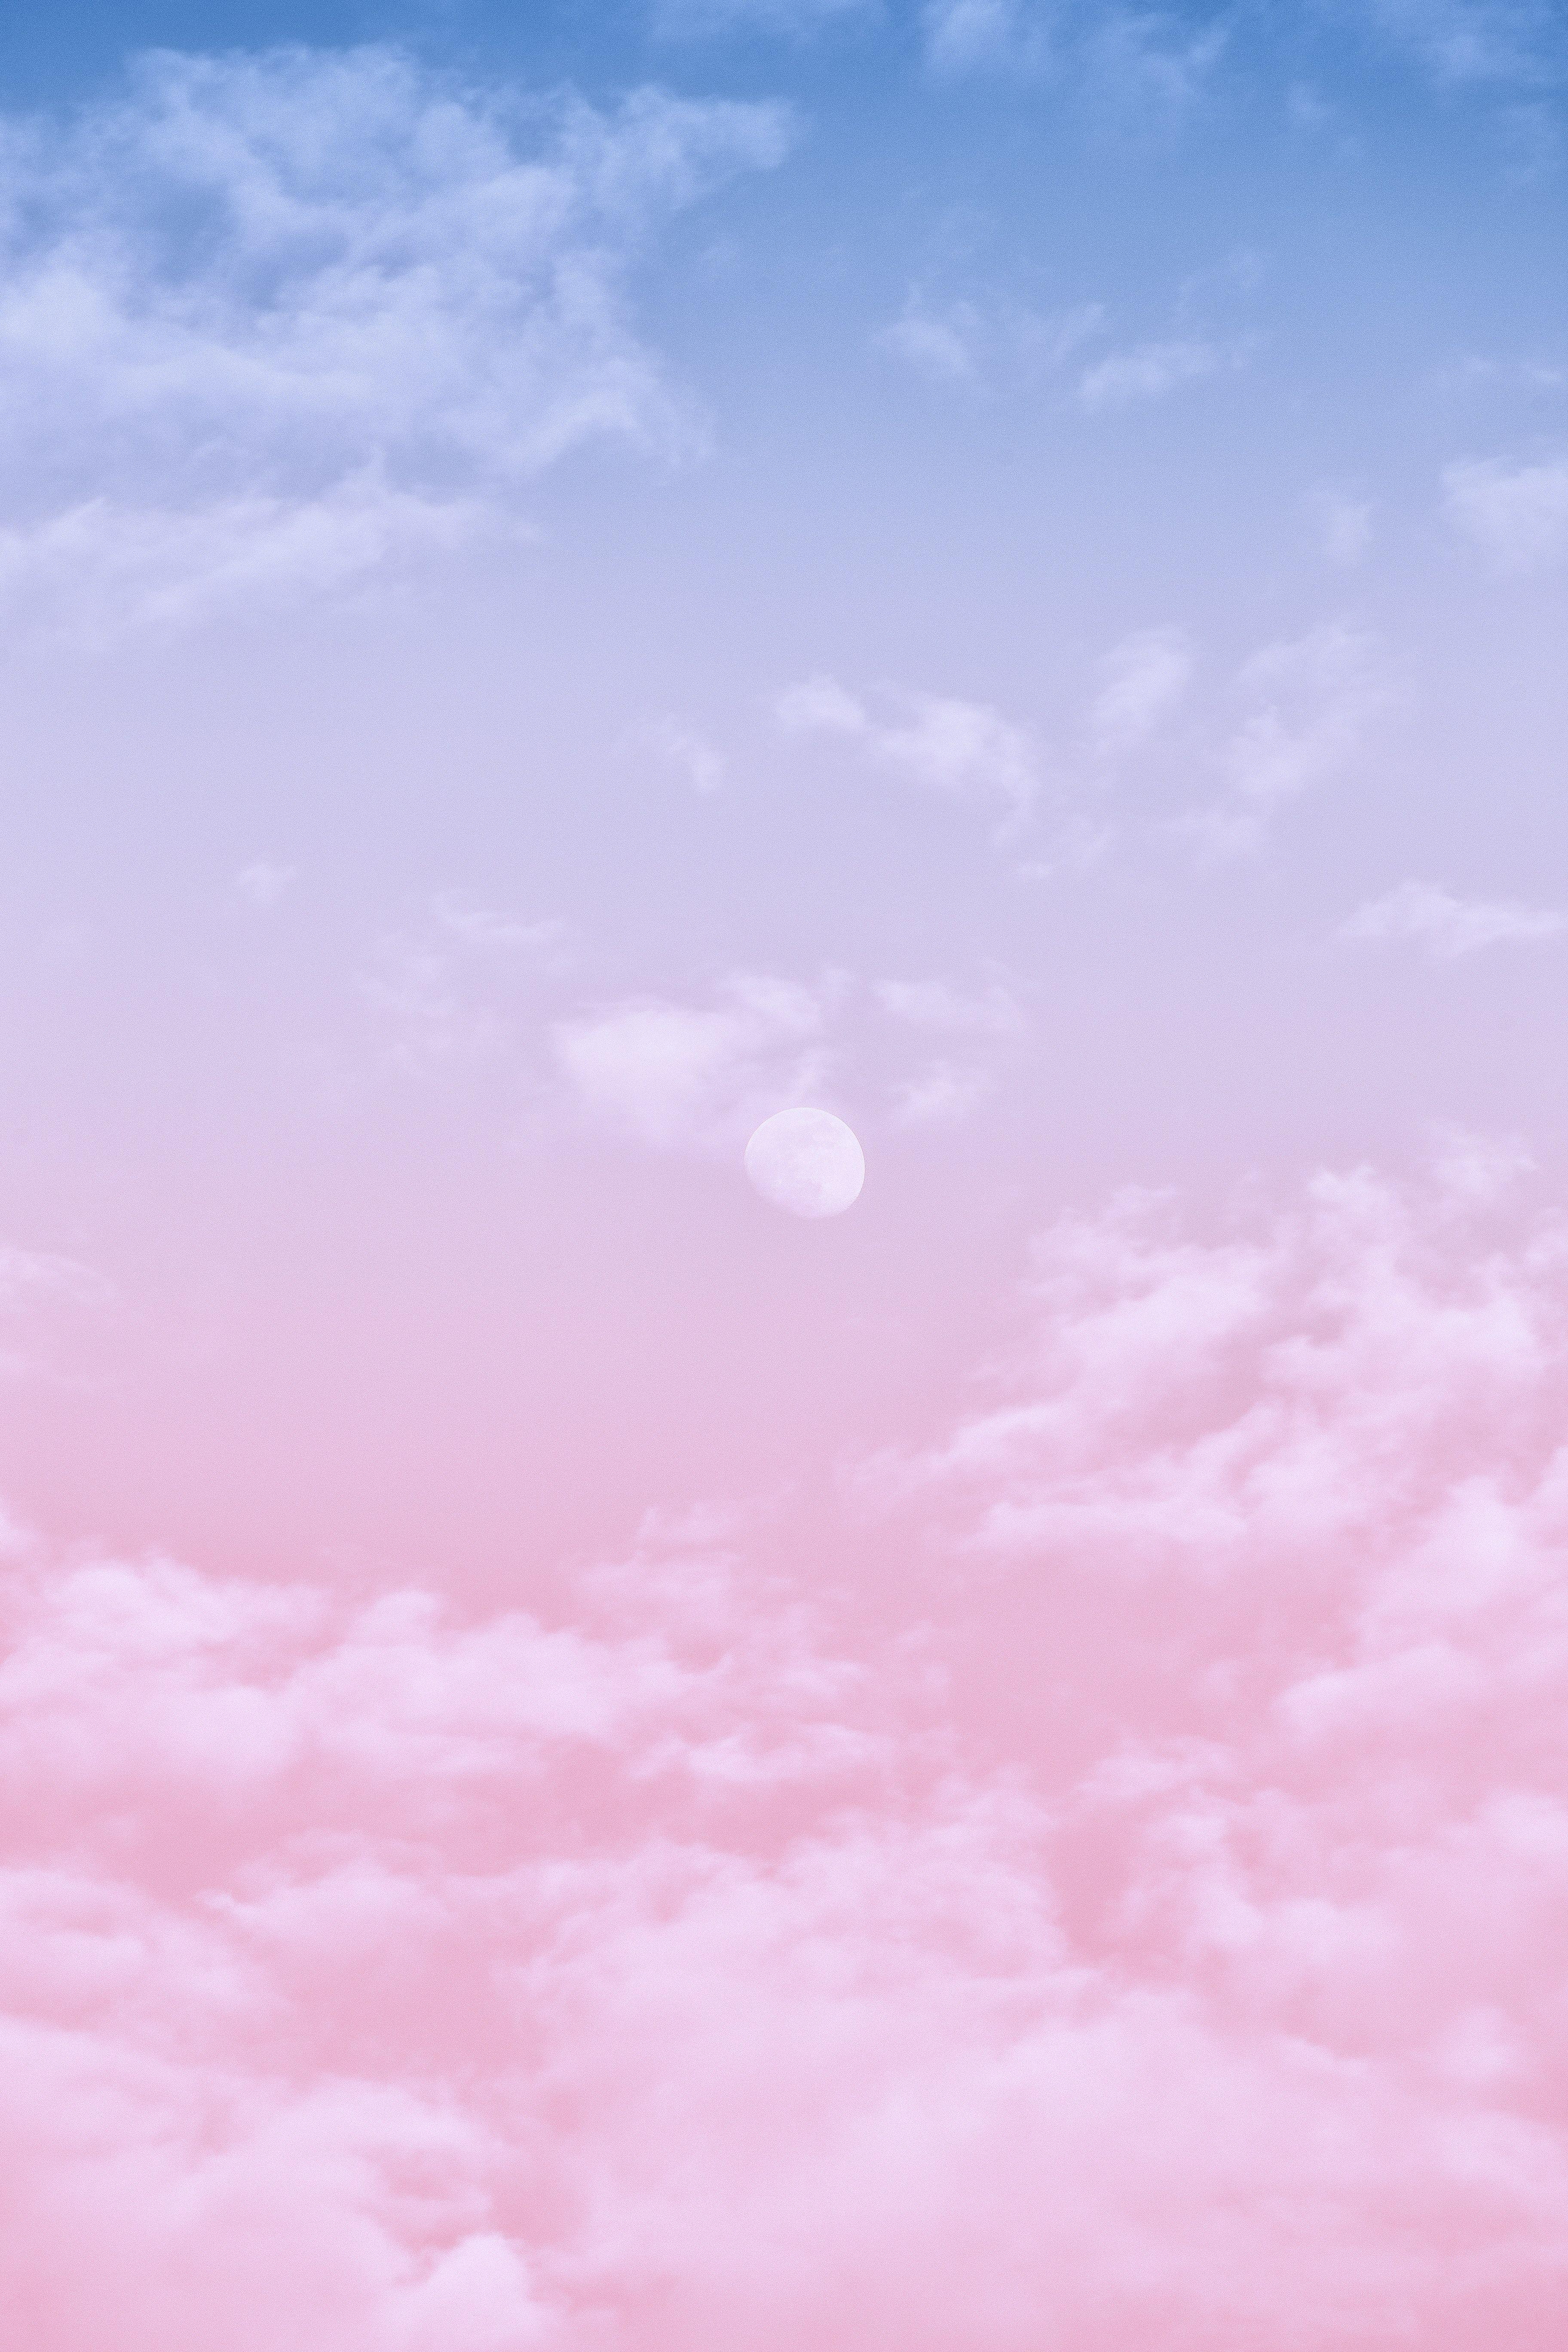 Pink and Blue Clouds Wallpapers - Top Free Pink and Blue Clouds ...